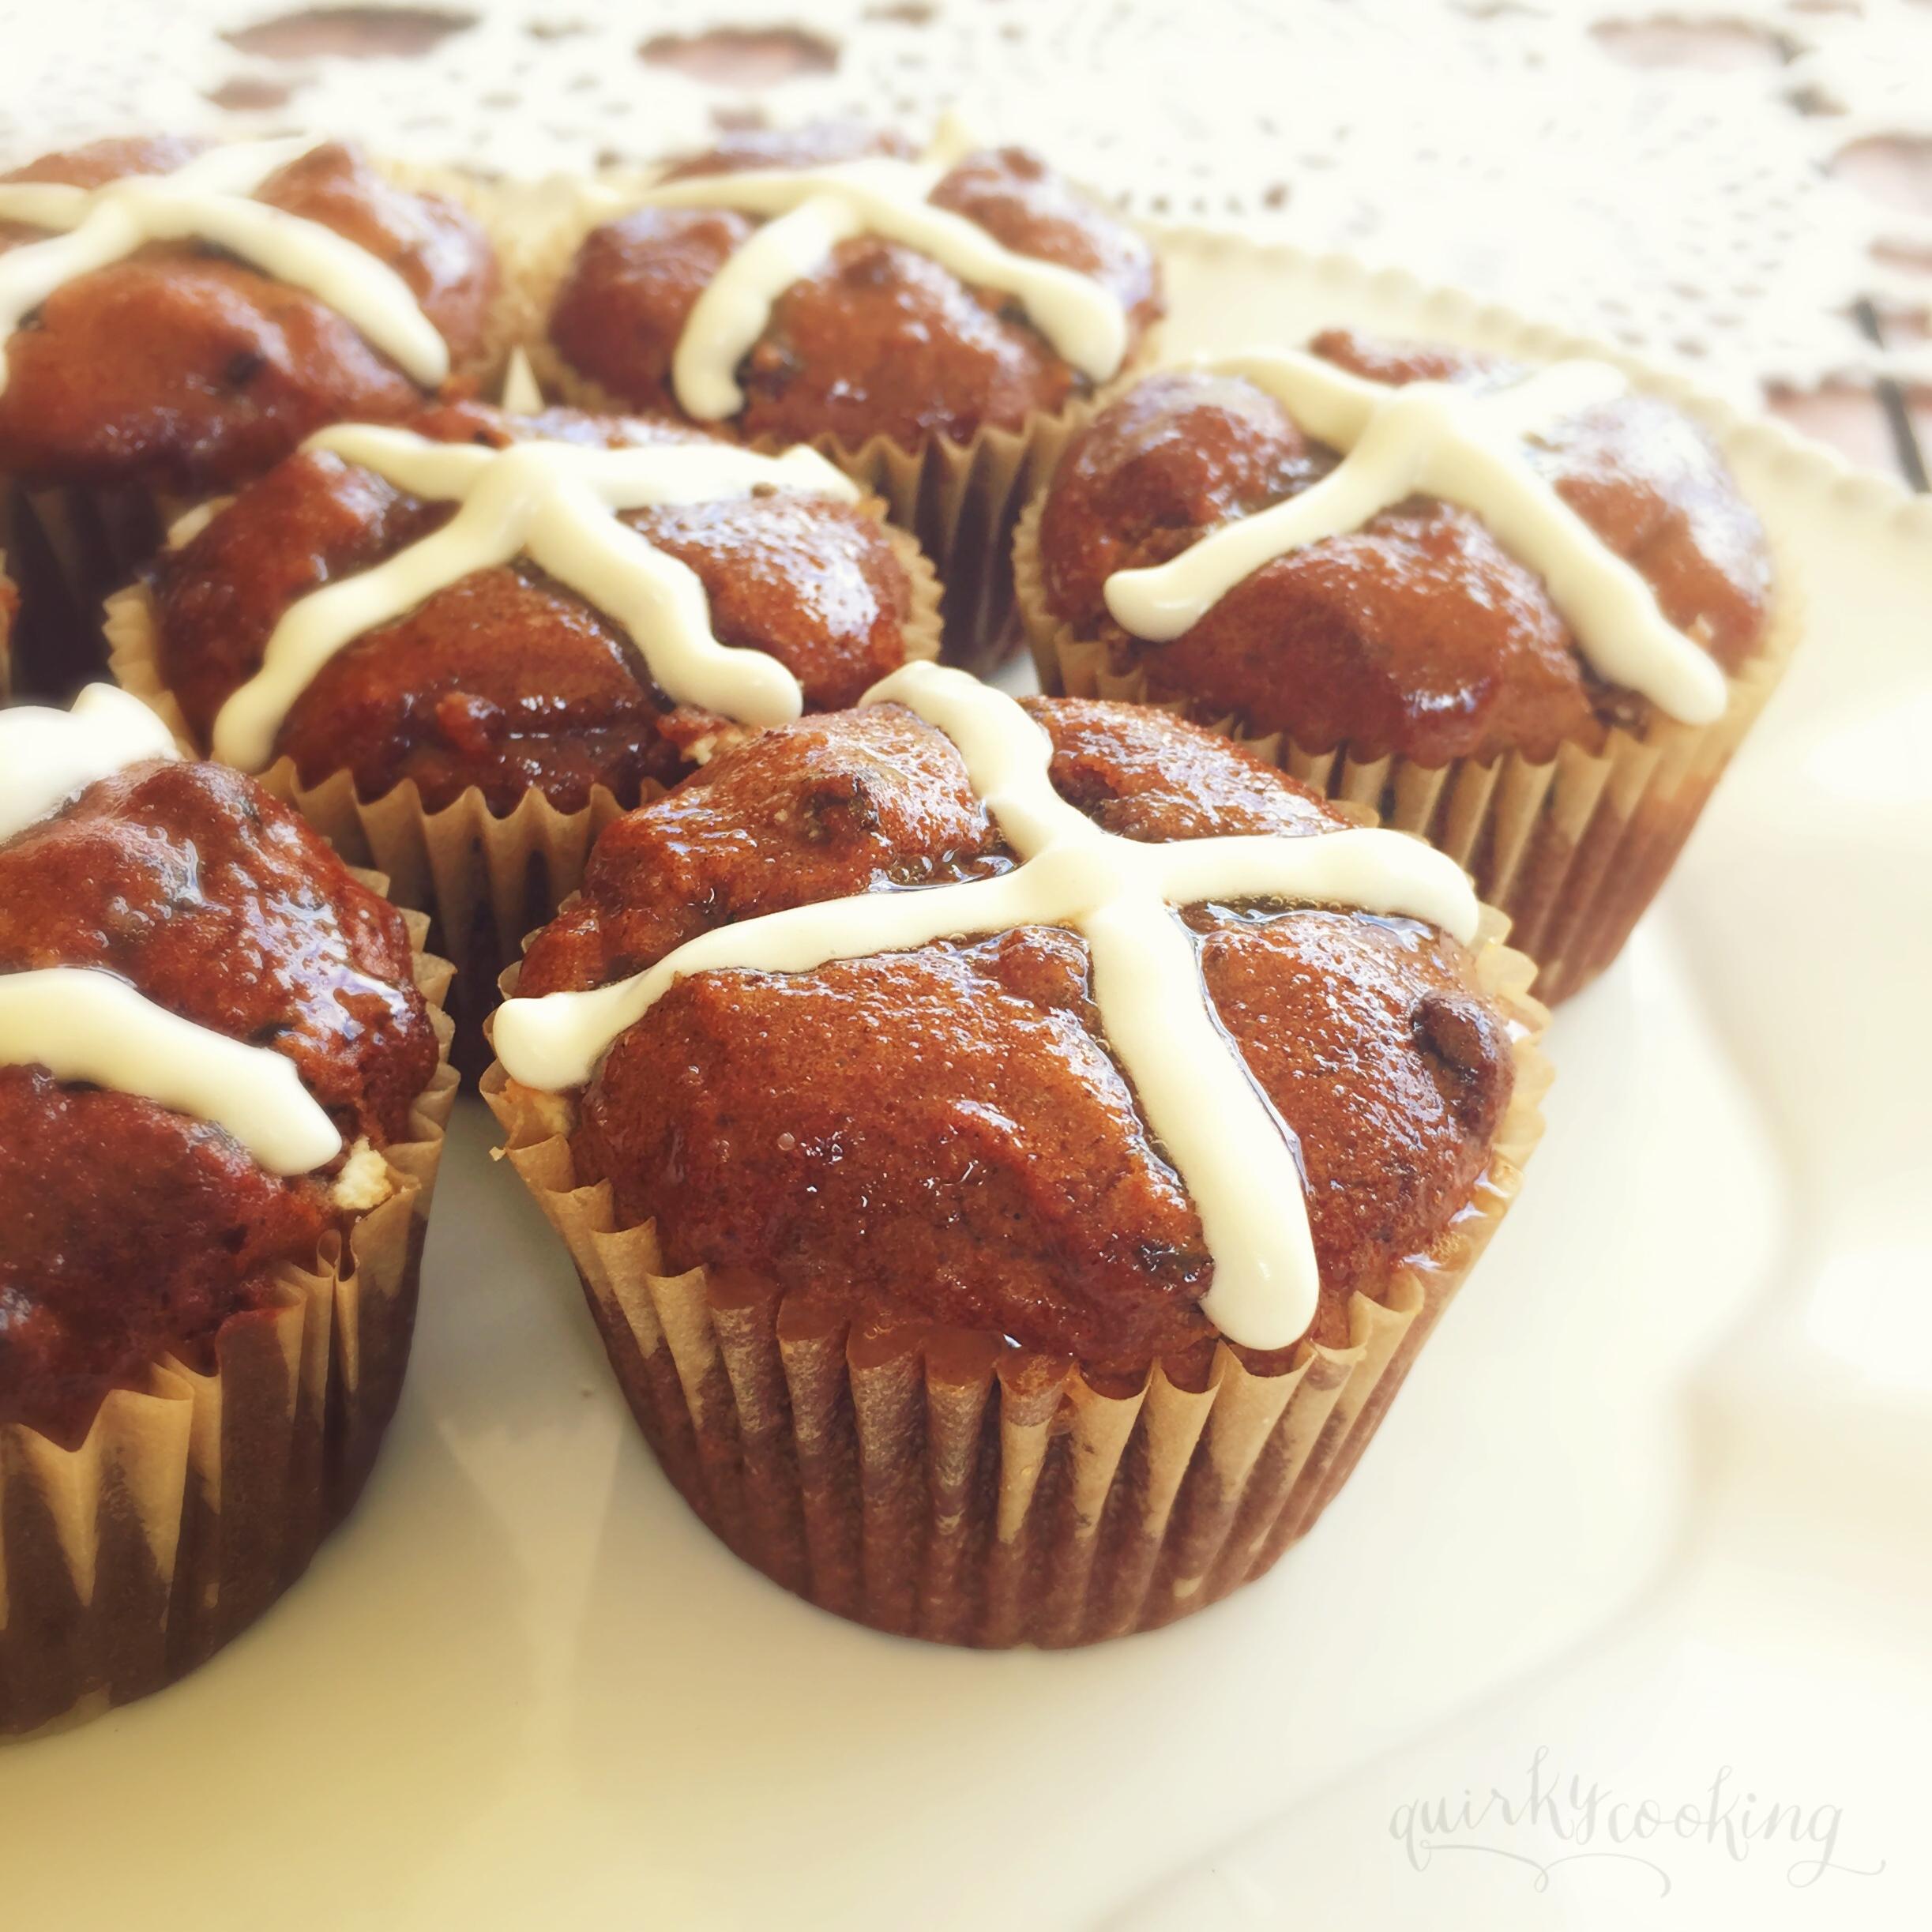  These Hot Cross Muffins are moist, fluffy and totally decadent!